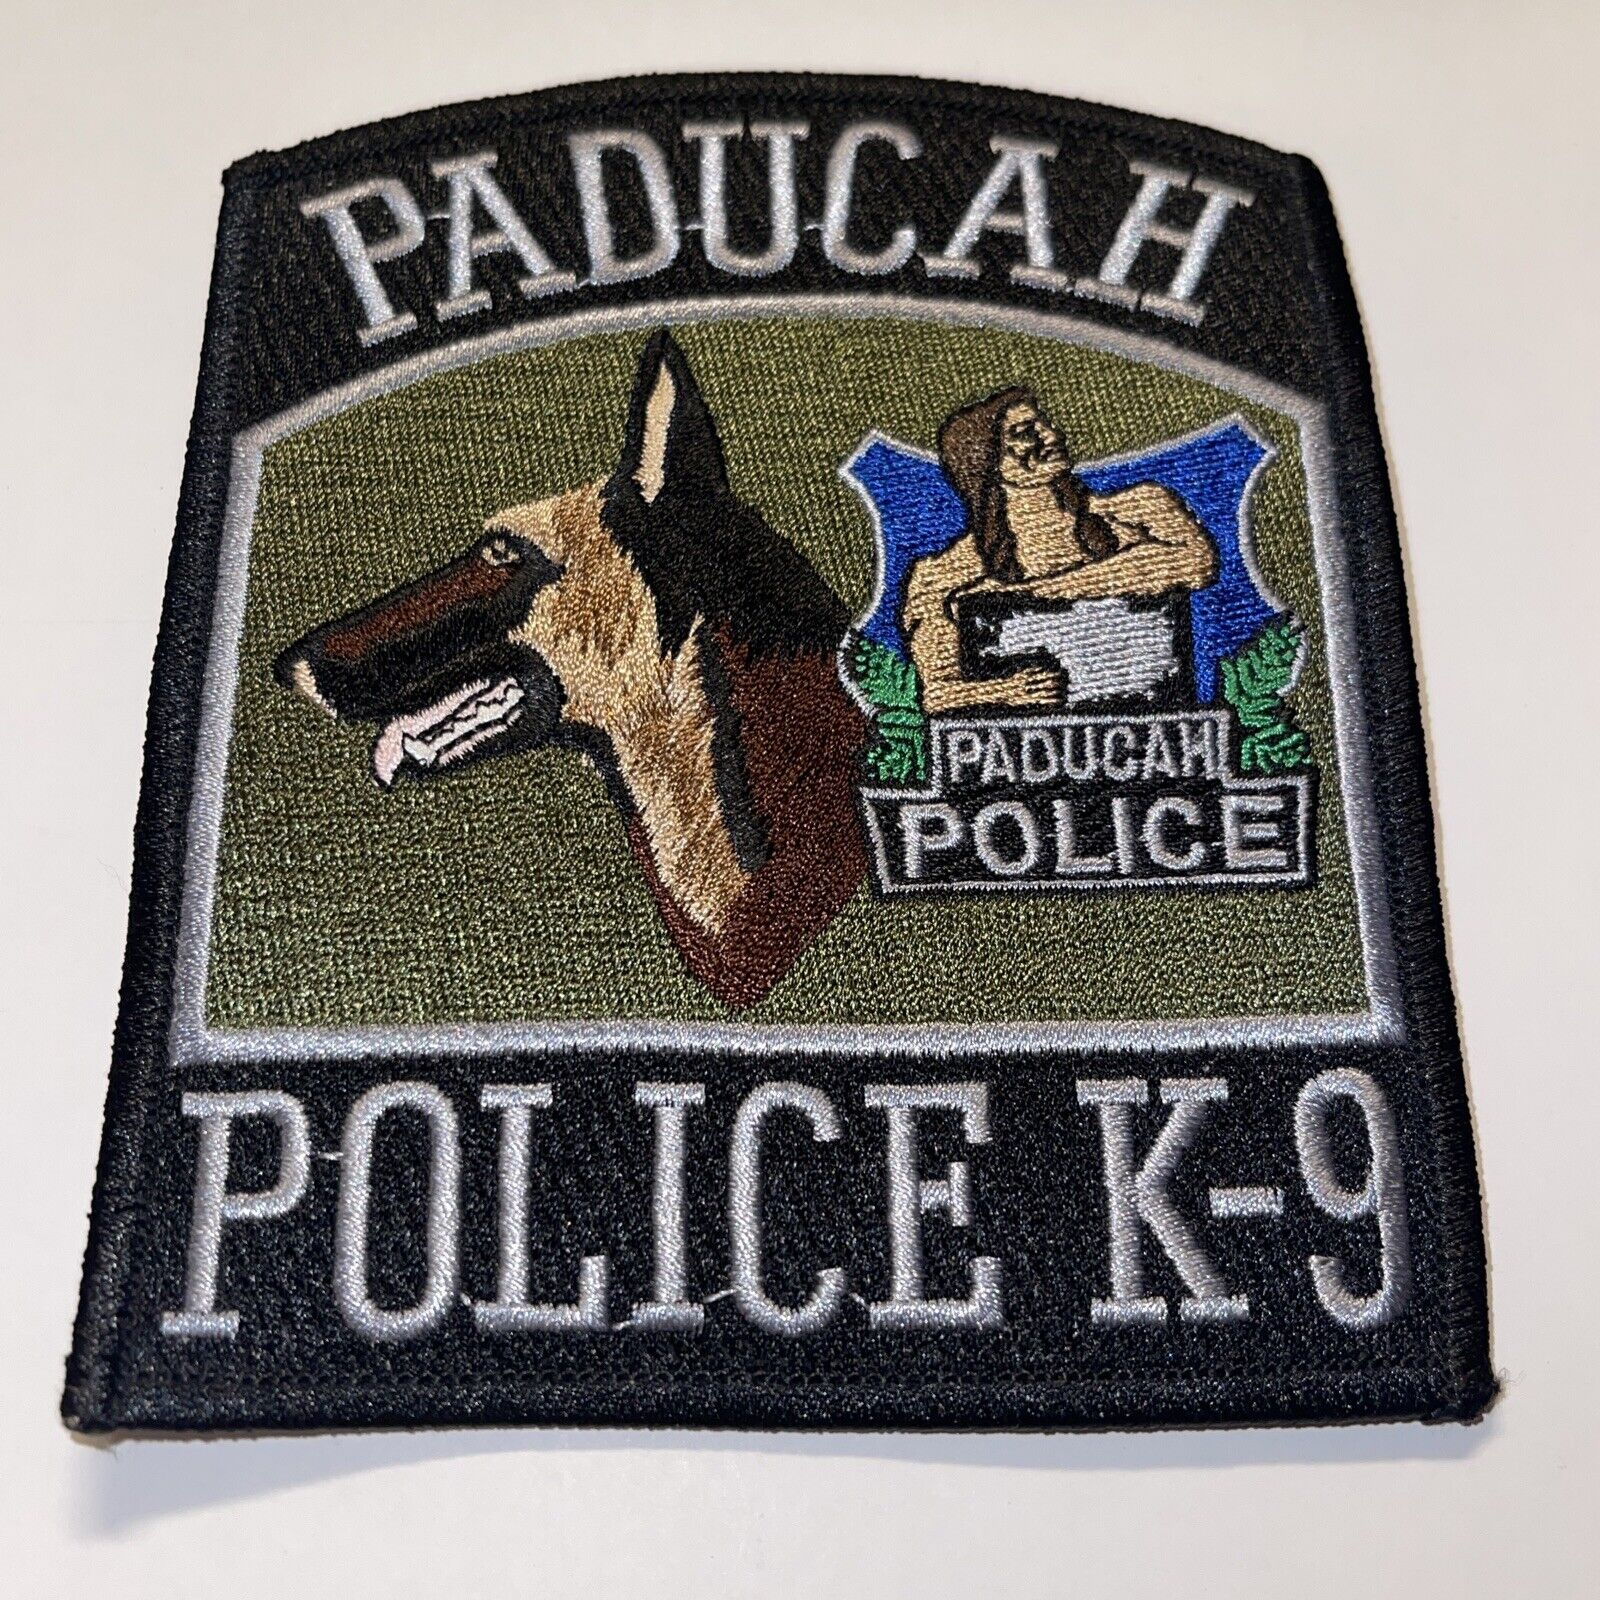 PADUCAH KENTUCKY K9 POLICE PATCH (SUBDUED VERSION) OBSOLETE SHOULDER PATCH